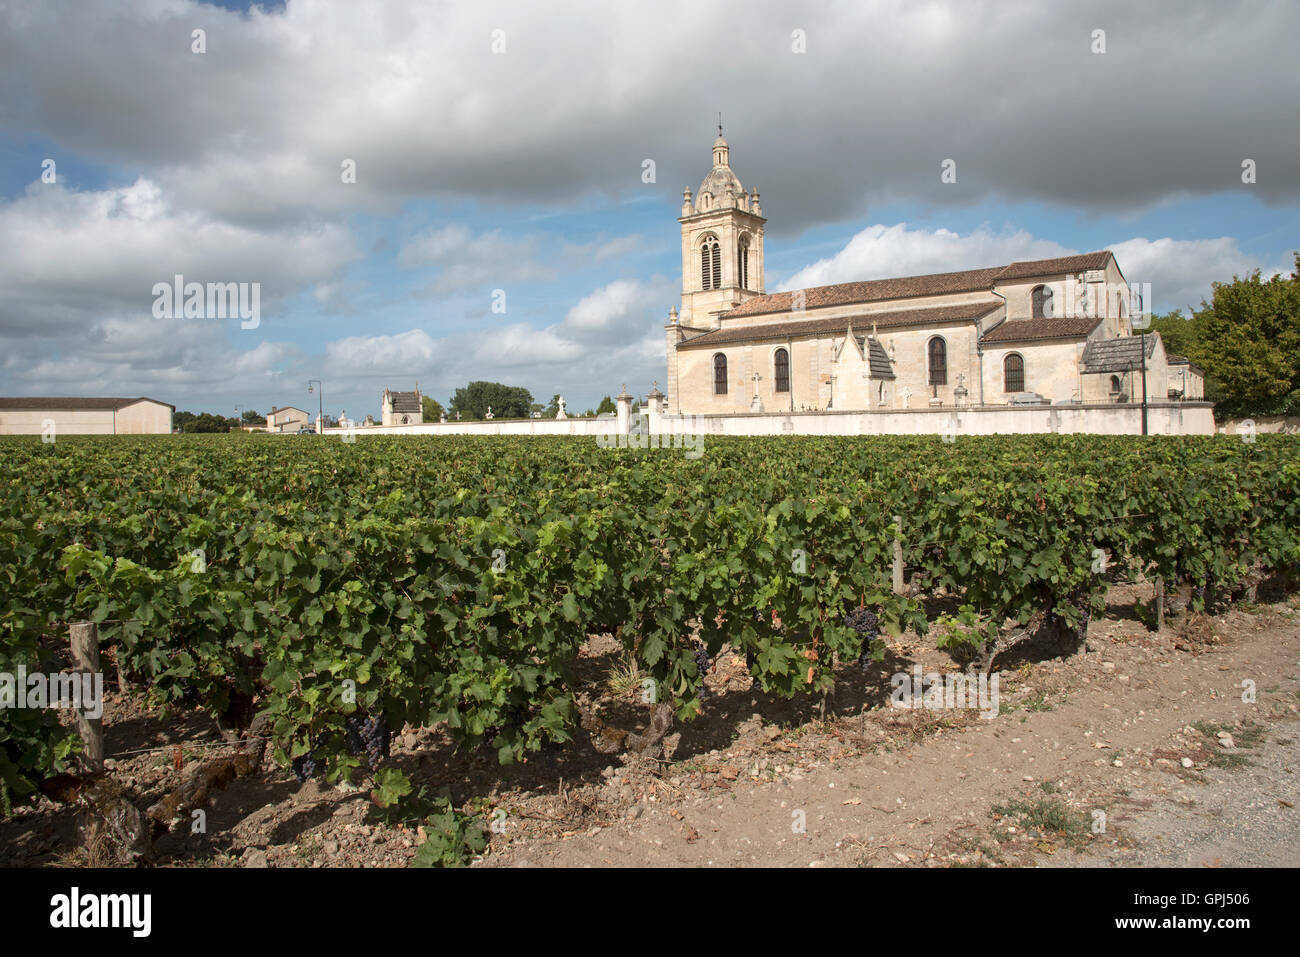 Margaux France - Surrounded with vines the historic Church of Margaux in the Medoc region of Bordeaux France Stock Photo